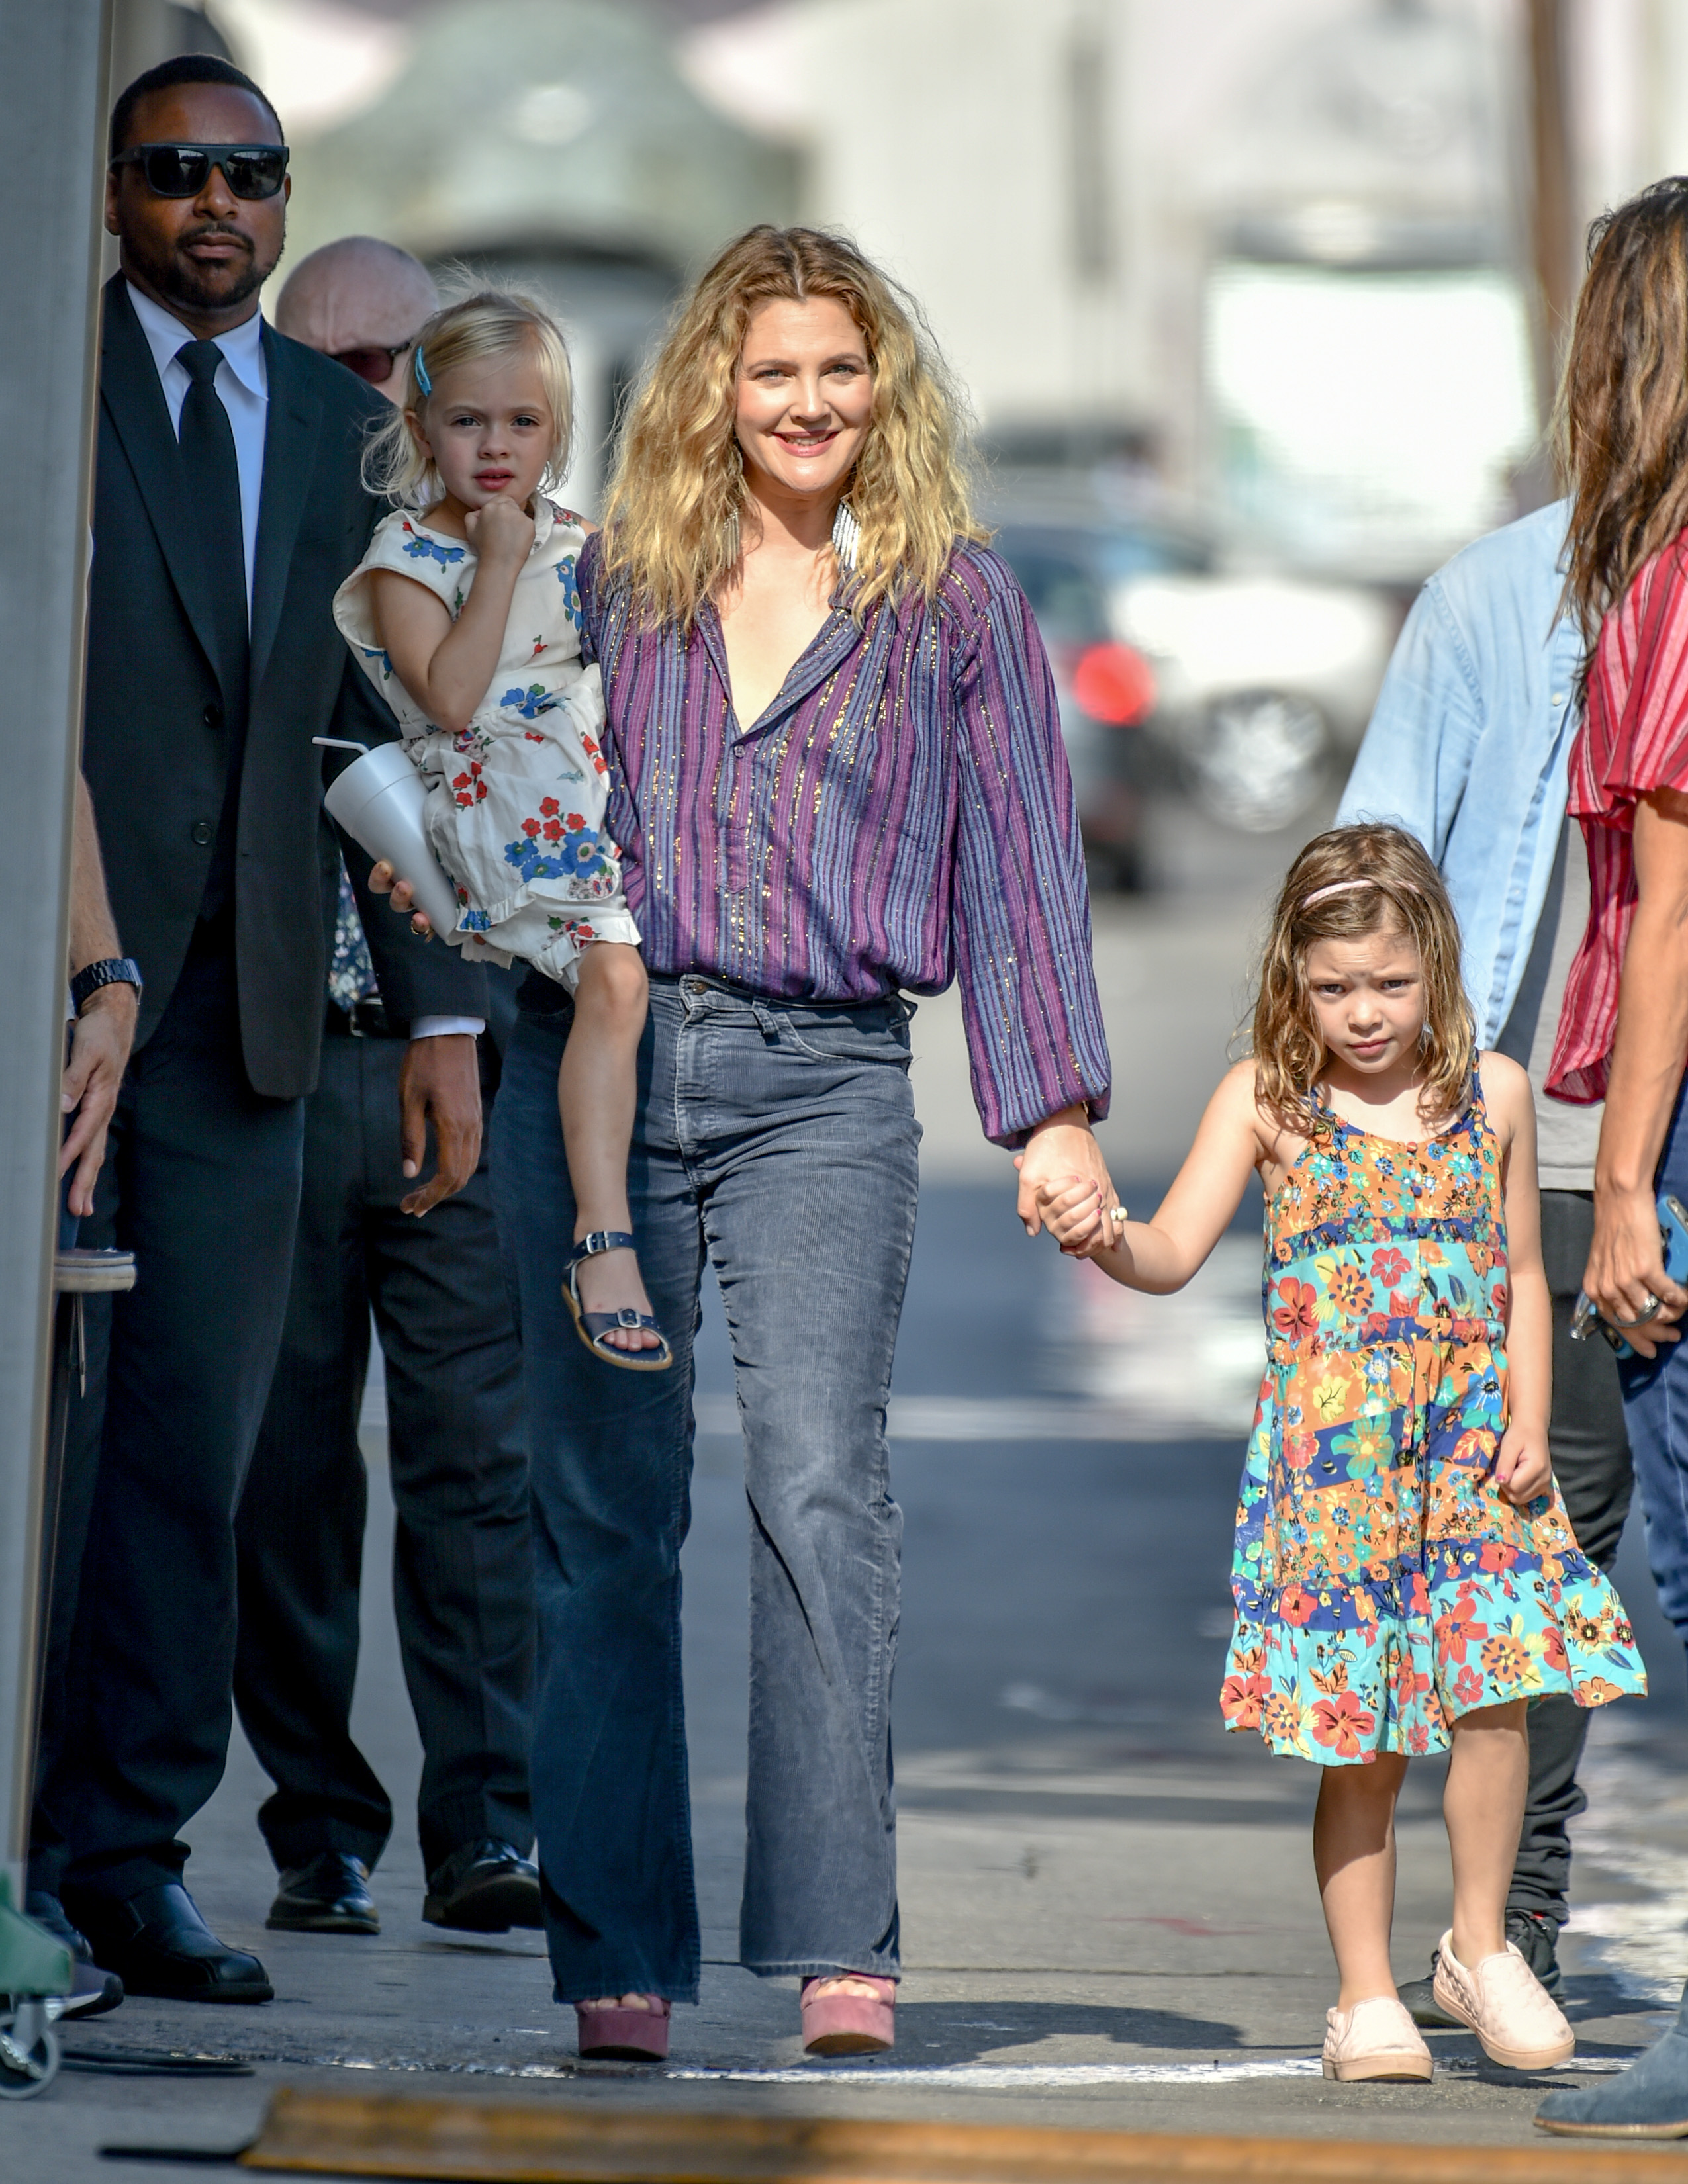 Drew Barrymore in 'Fight or Flight Mode' After Giving Birth